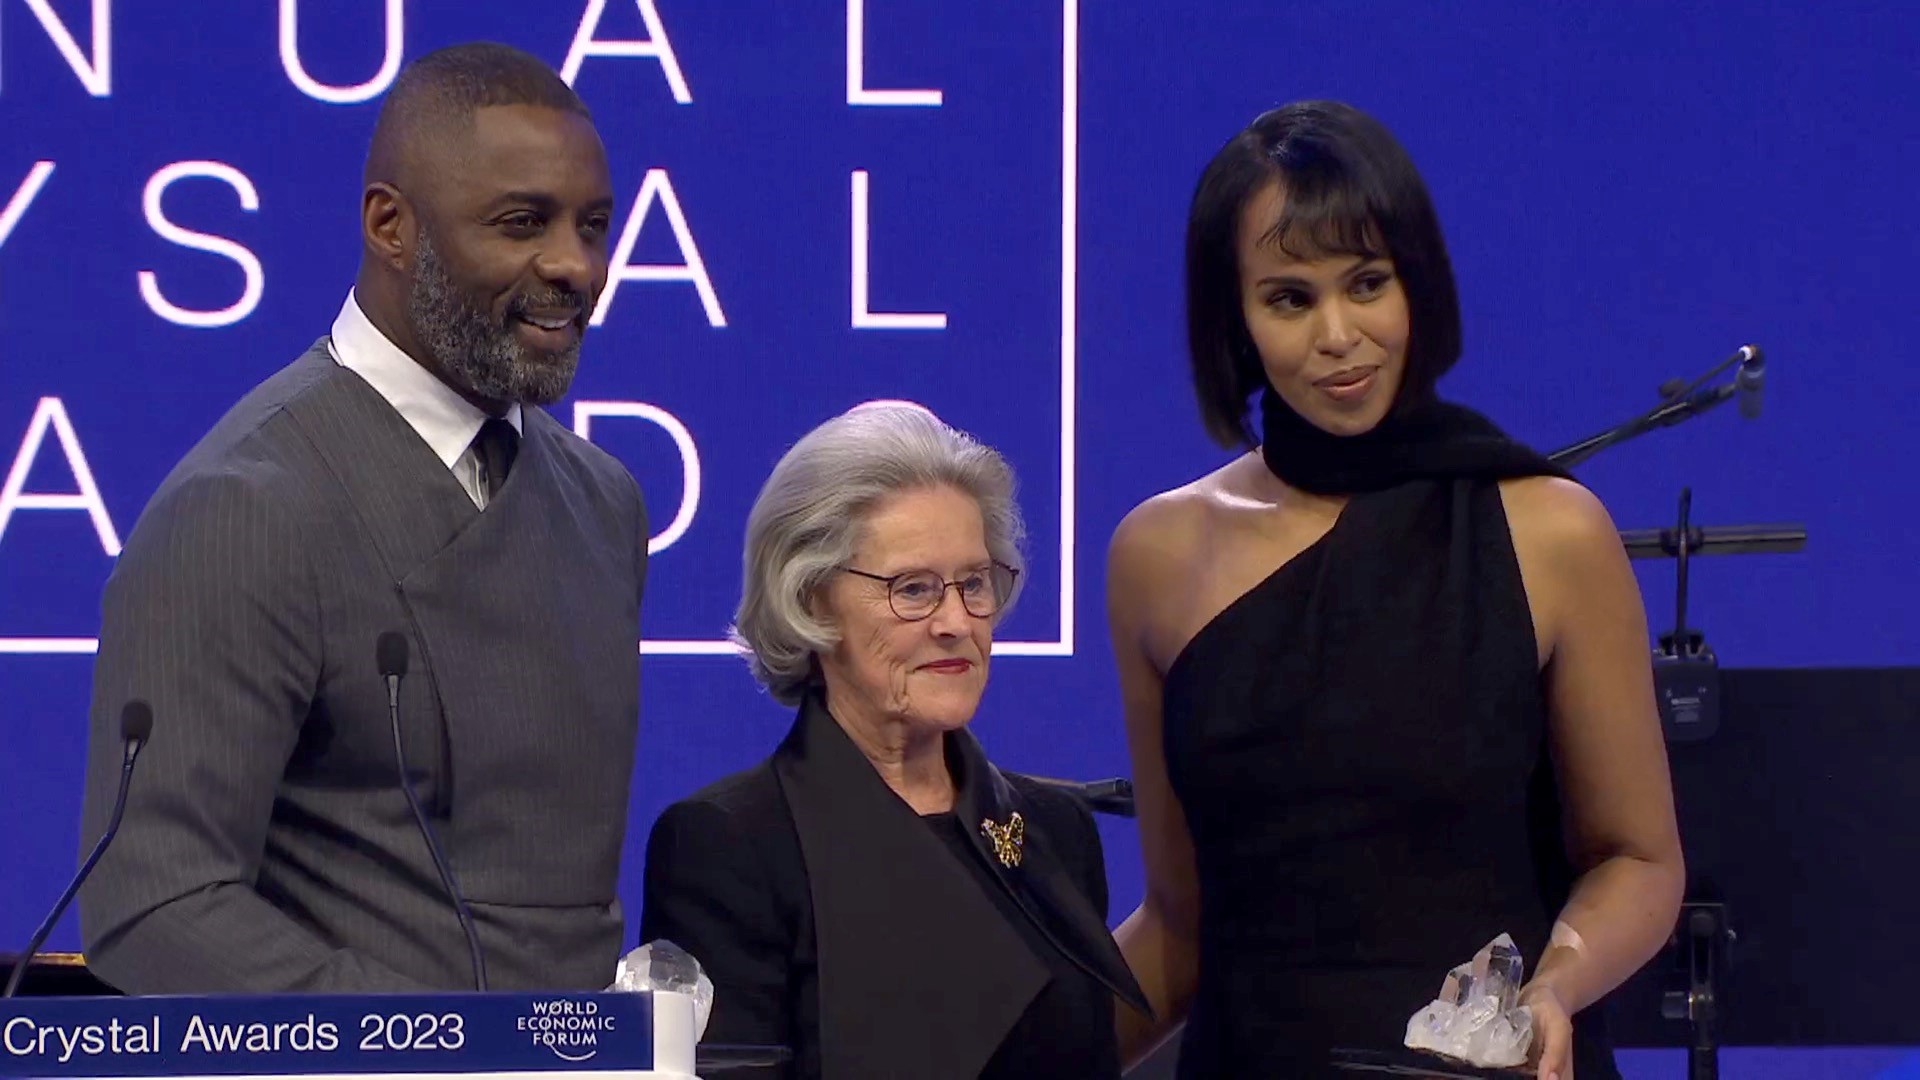 Actor Idris Elba tells world leaders that poor farmers need investment not handouts at award ceremony